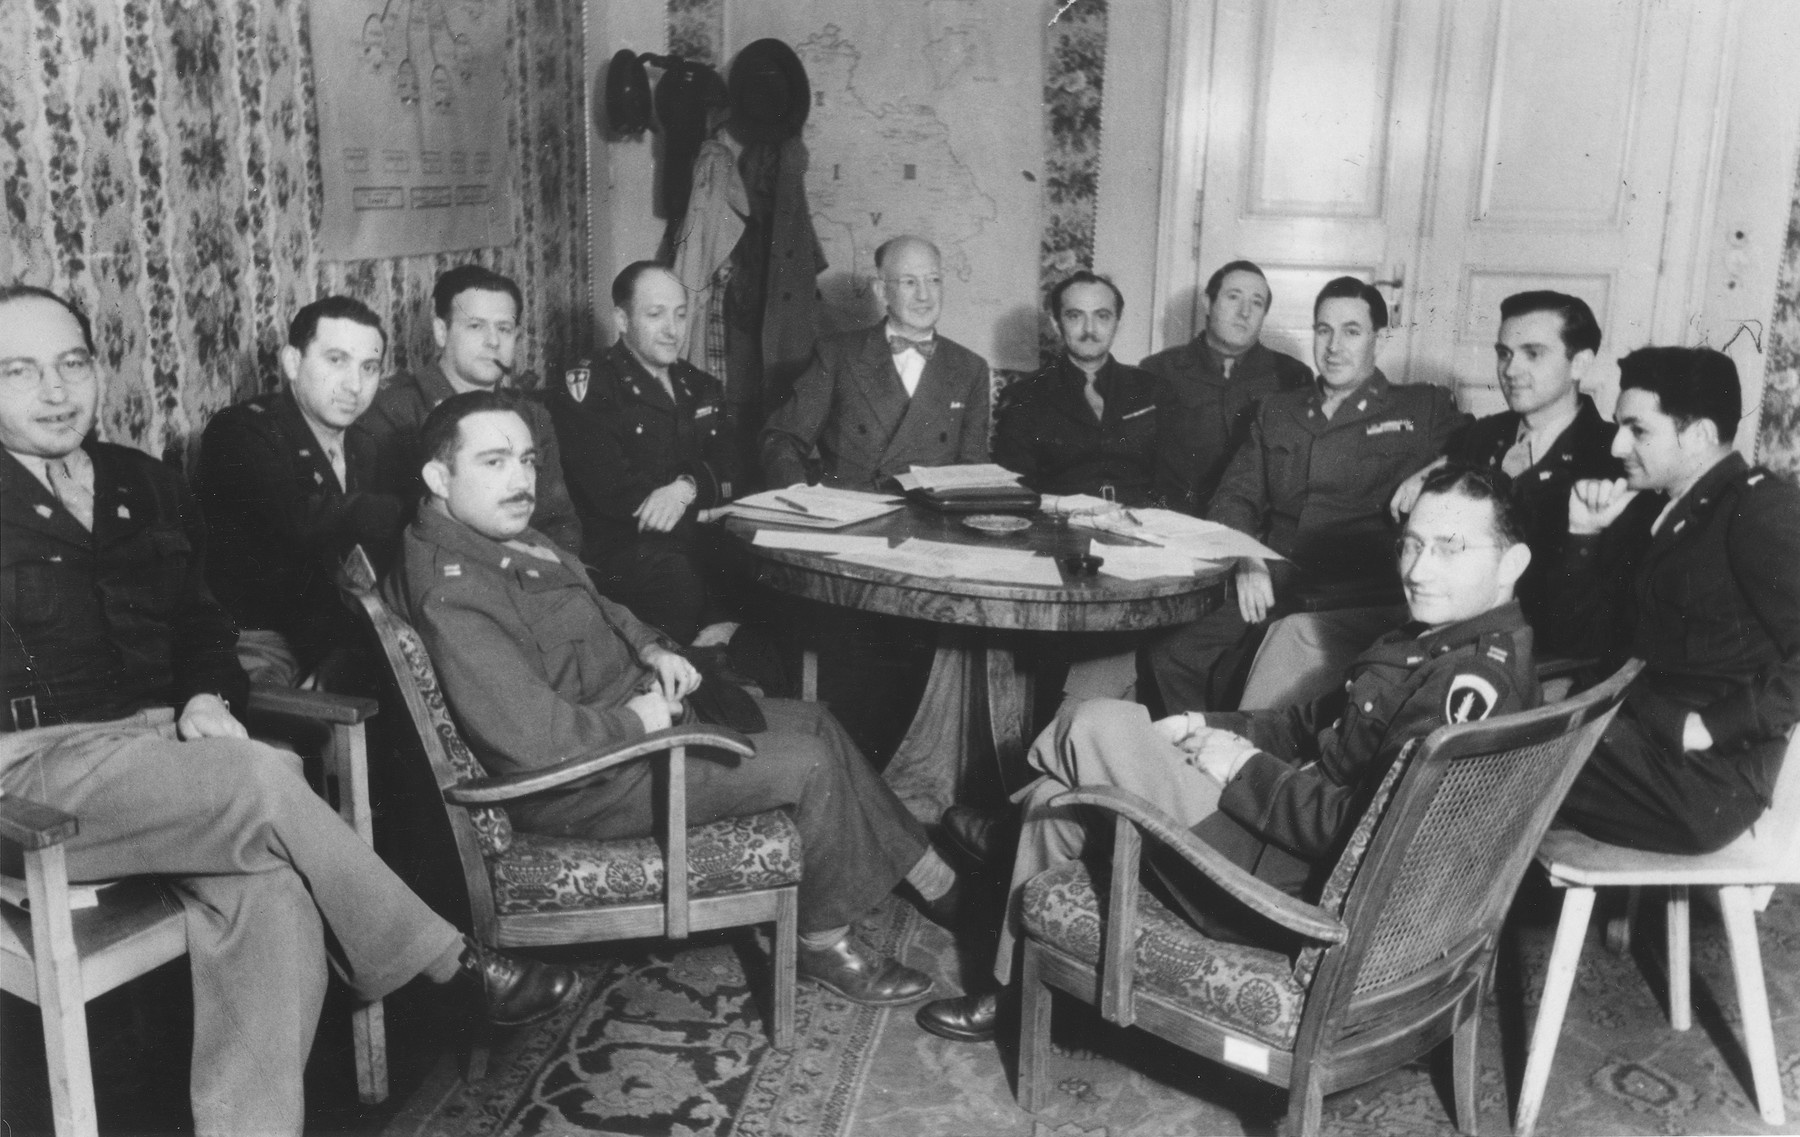 American Jewish army chaplains attend a meeting called by Judge Louis Levinthal, Advisor on Jewish Affairs to the U.S. Army in Germany.  

Among those pictured are Judge Louis Levinthal (with bow tie); Mayer Abramowitz (second from the right, in front of the door); Abraham Klausner (far right); and Oscar Lifschutz (front left in the arm chair).